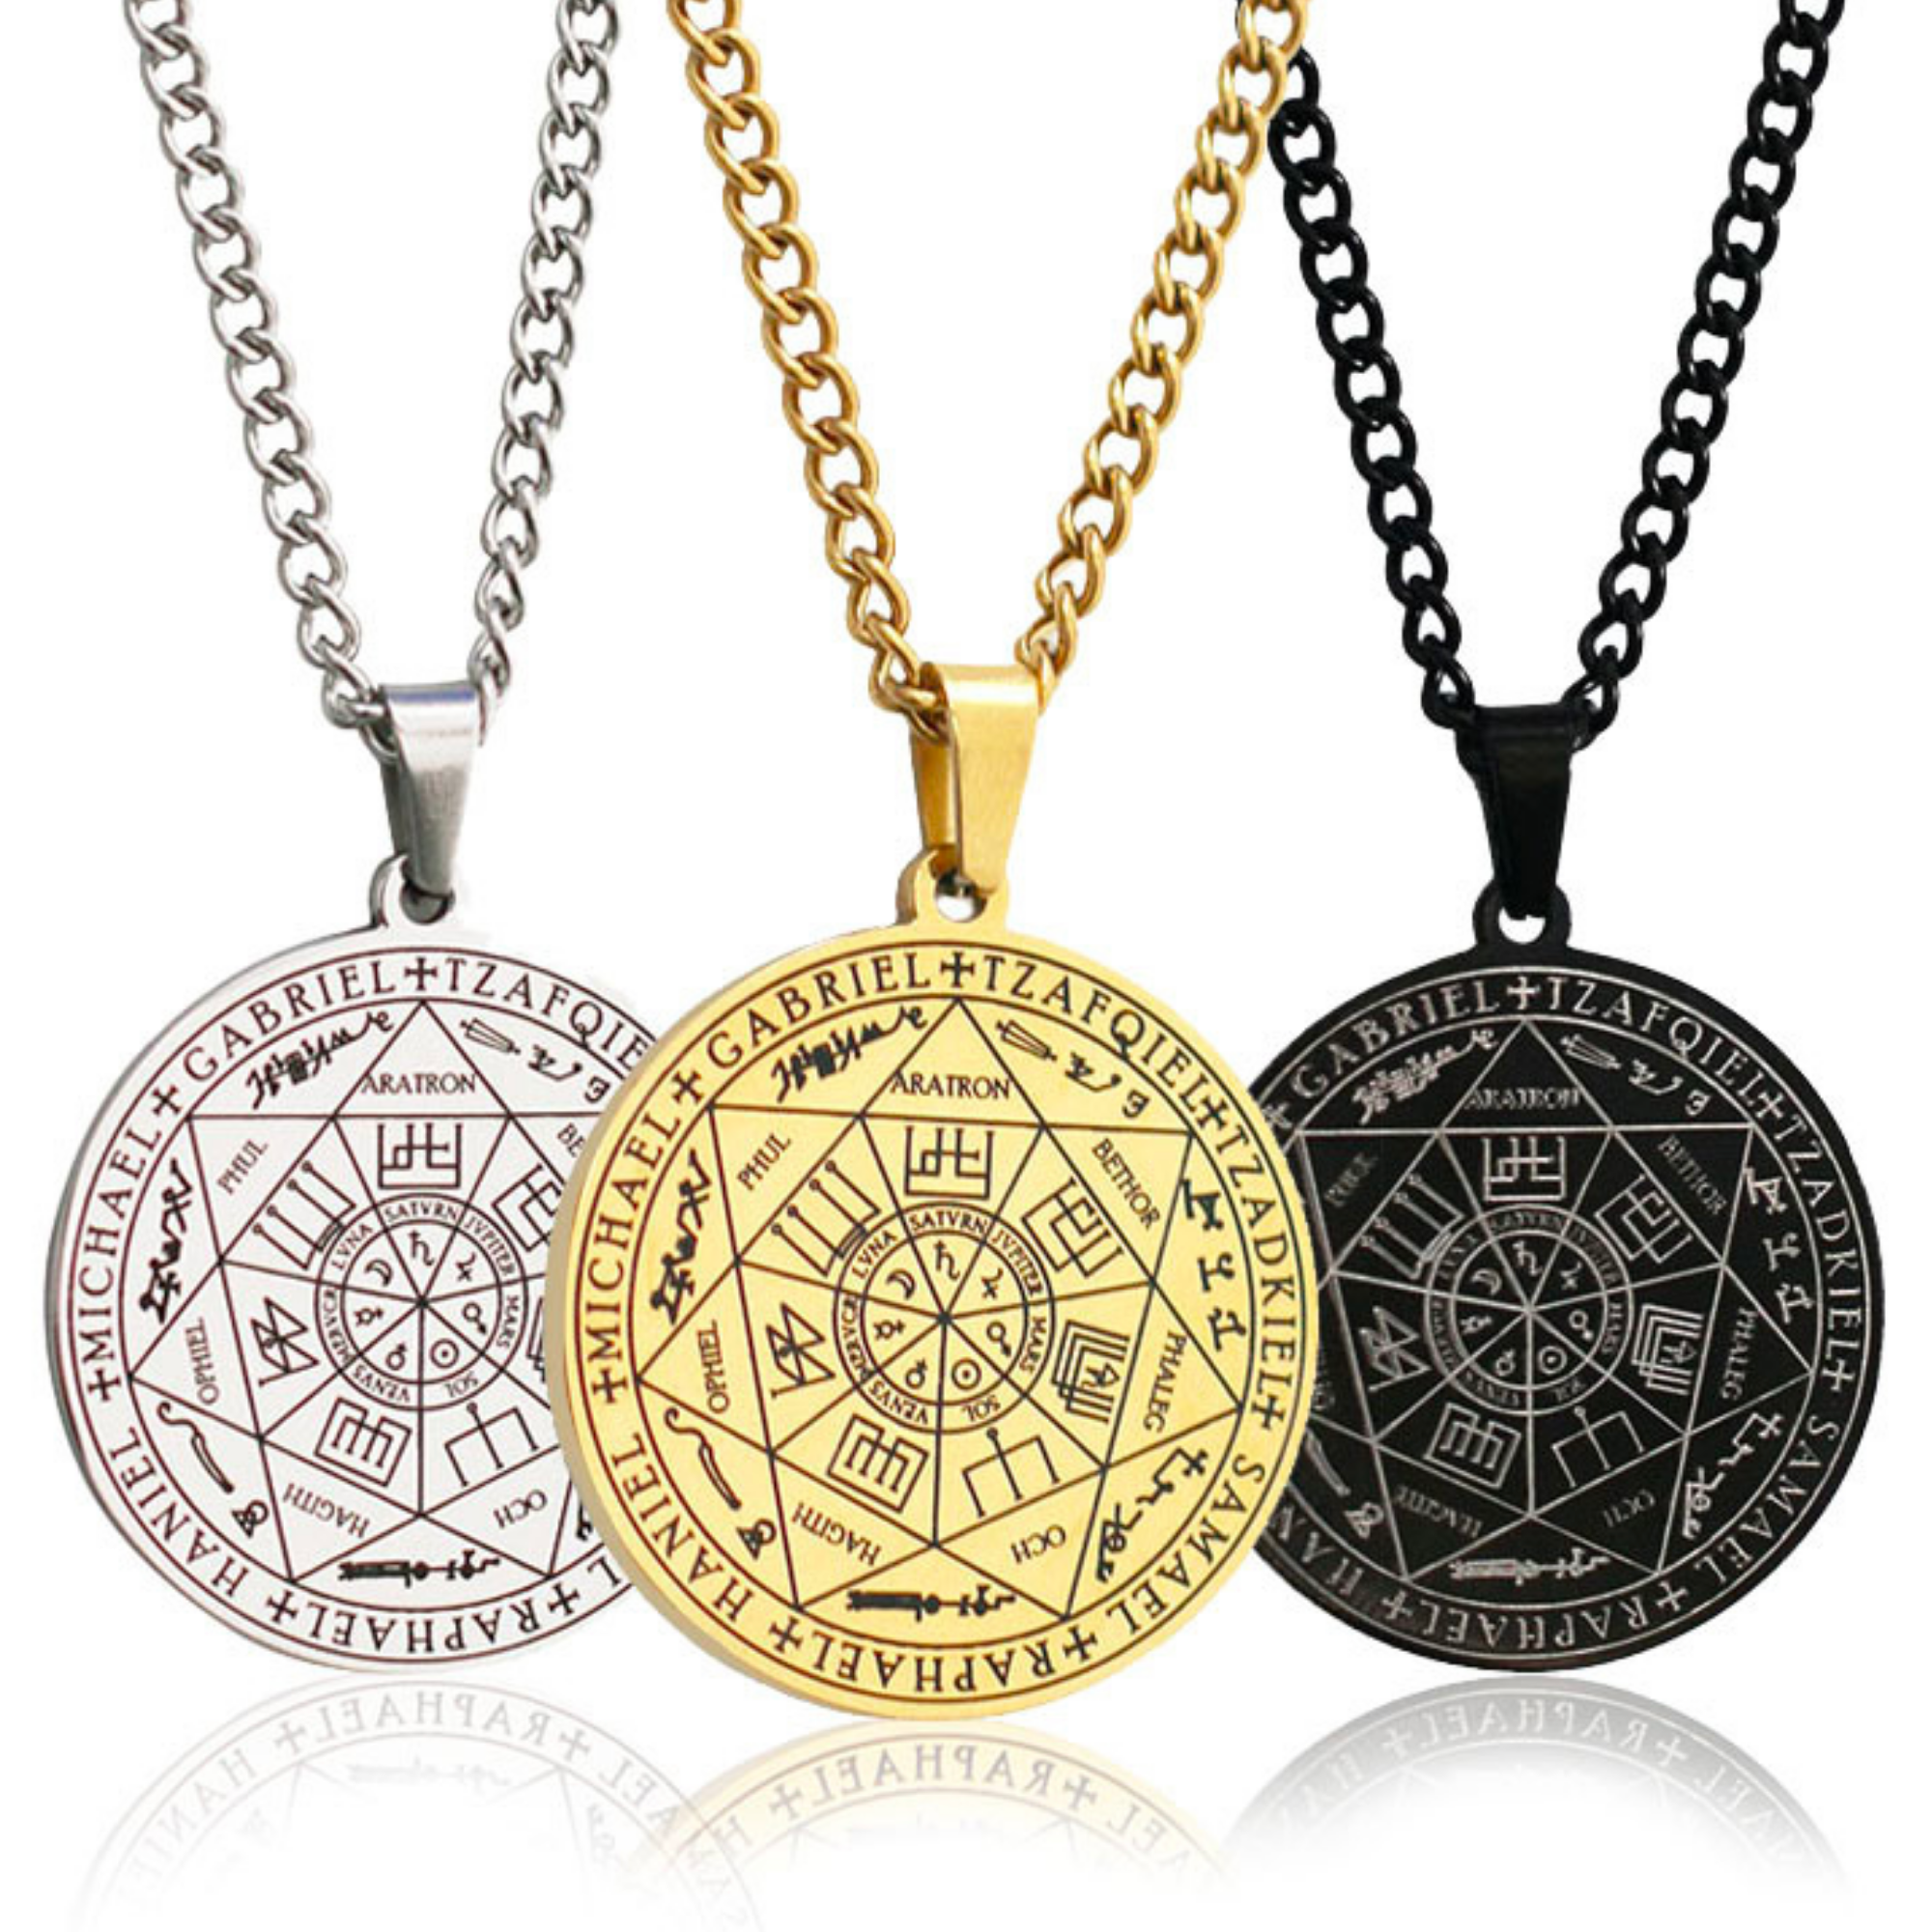 Buy Seals of the Seven Archangels Necklace Protection Amulet Pendant  Talisman, Safety From Evil Eye, Curses, Hexes, Protection Gift Online in  India - Etsy